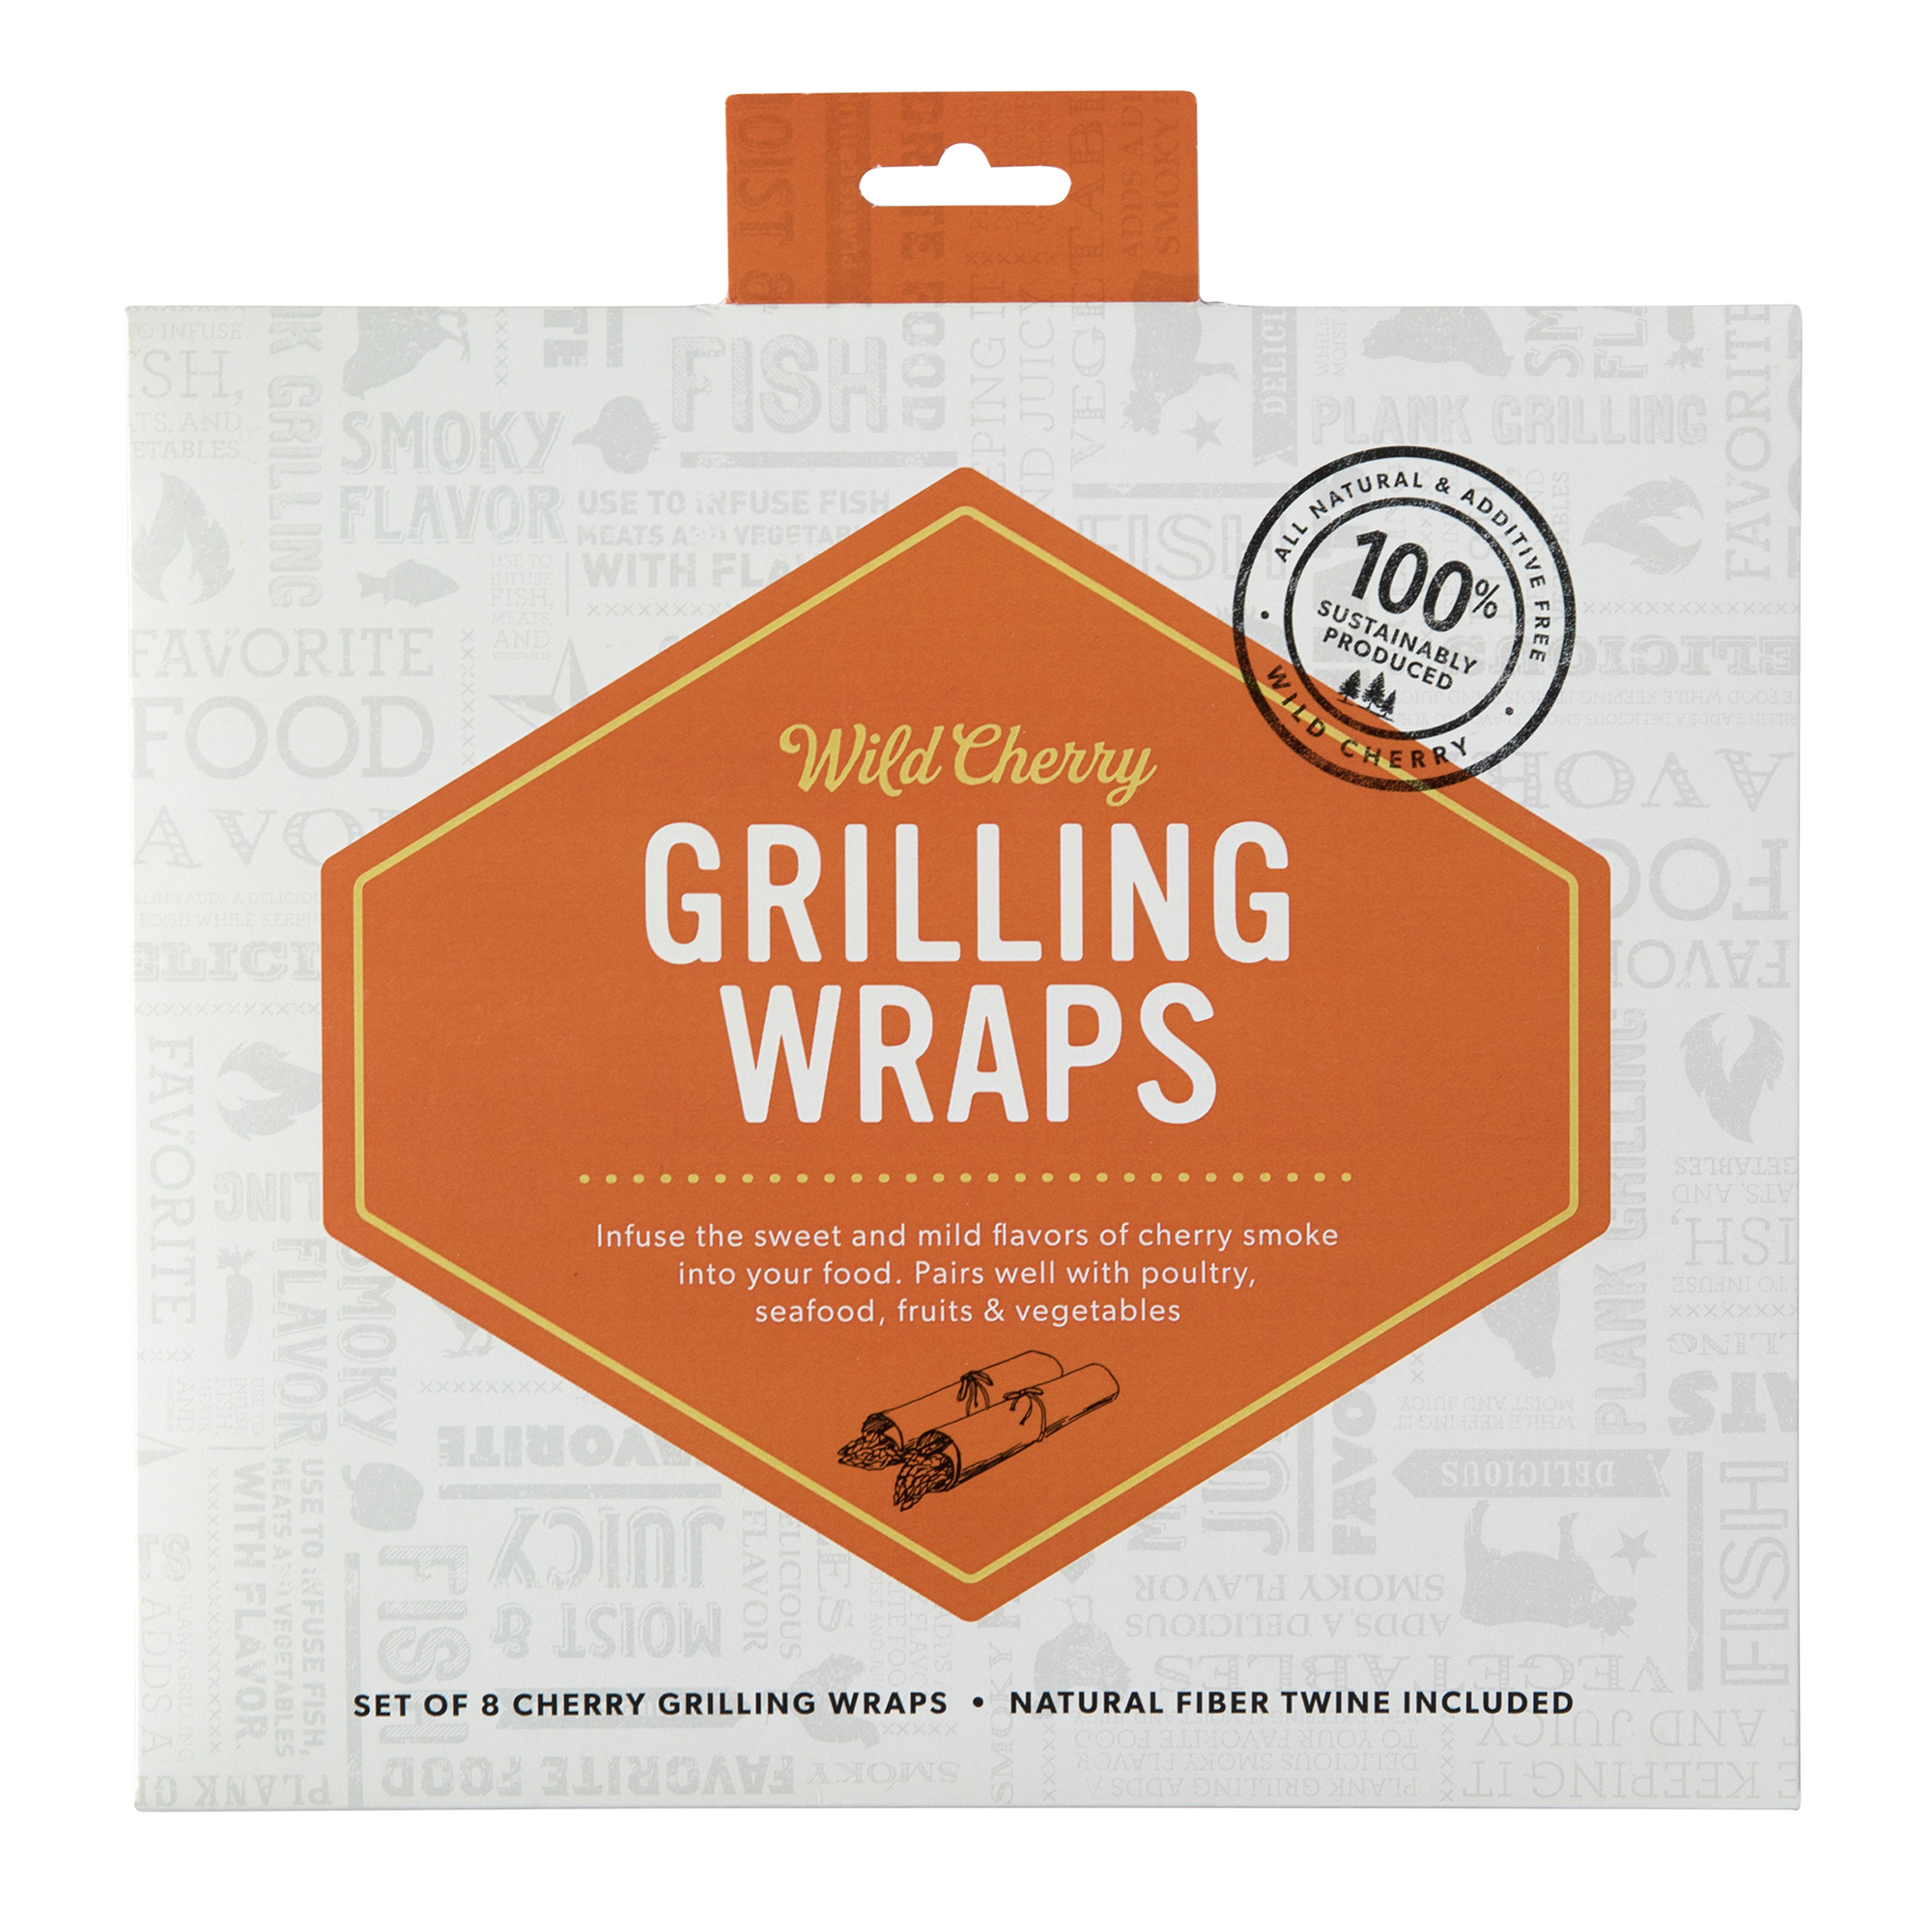 /assets/images/products/product-images/HHM332EHDFQ42/64a85076caff7_CherryGrillingWraps.jpg